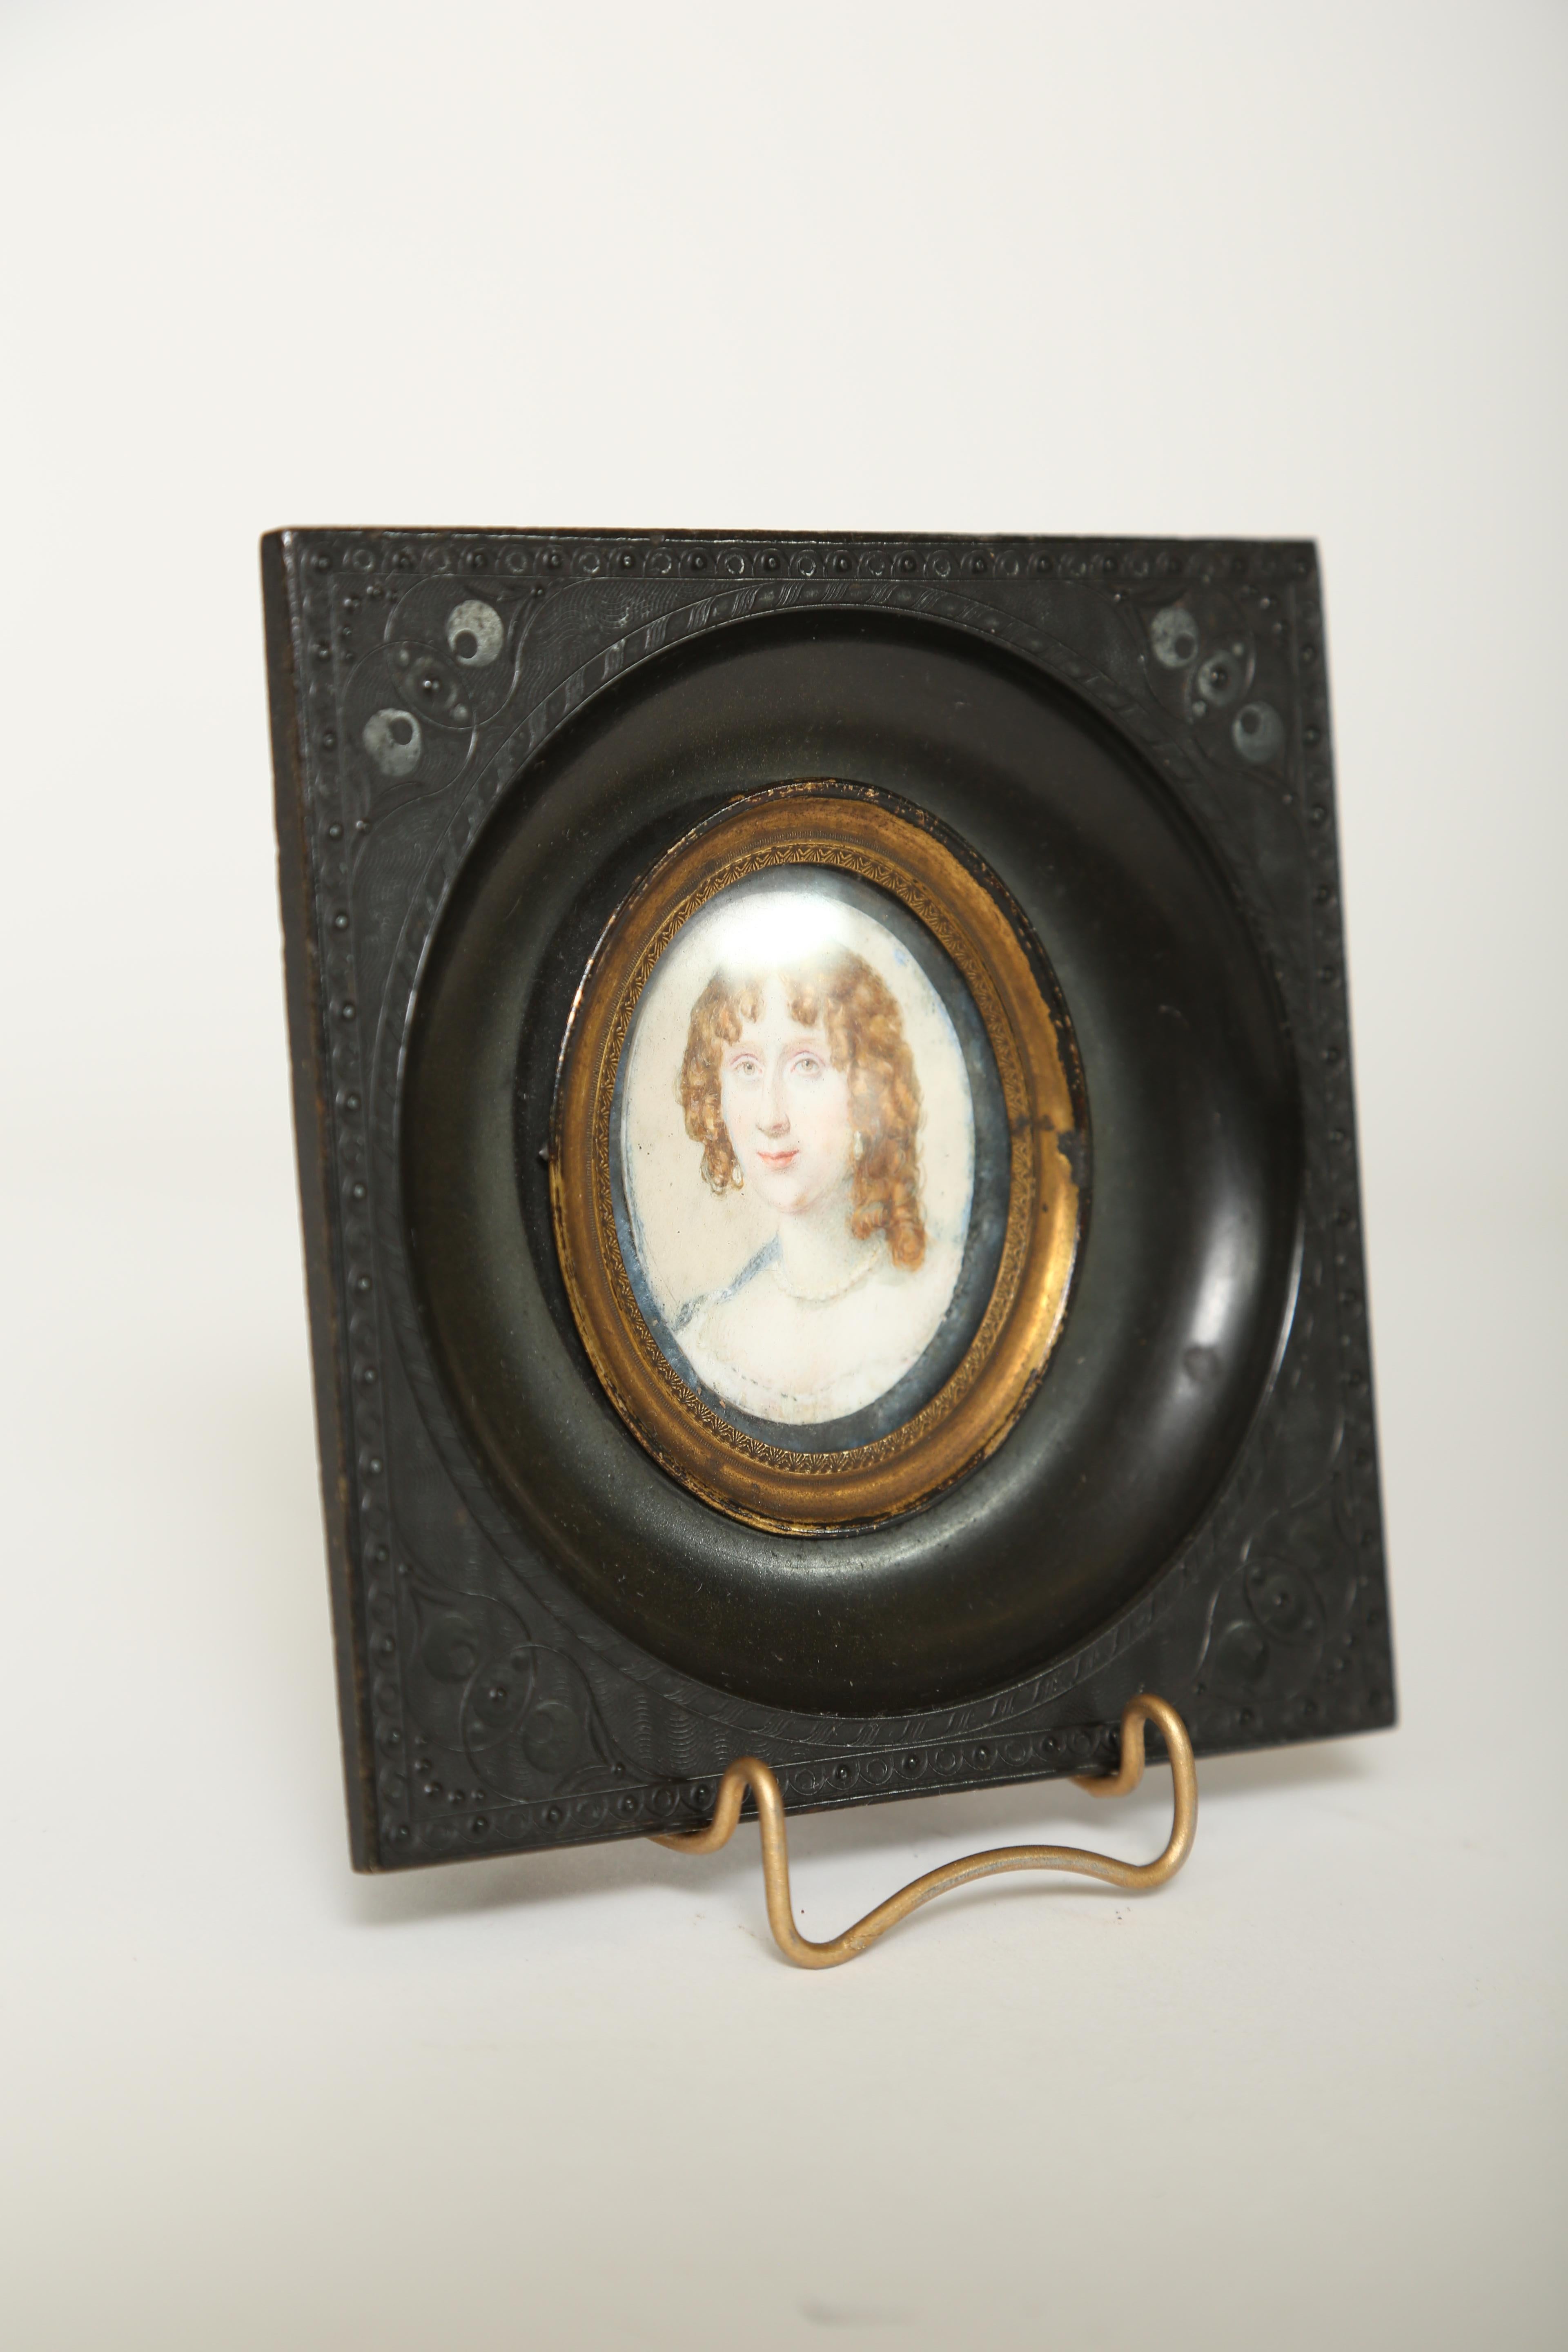 Miniature portrait of a lady delicately hand painted on ivory in an engine turned style gutta-percha frame. On the back the original hand forged iron loop remains intact.

(This item is eligible for a gift box)